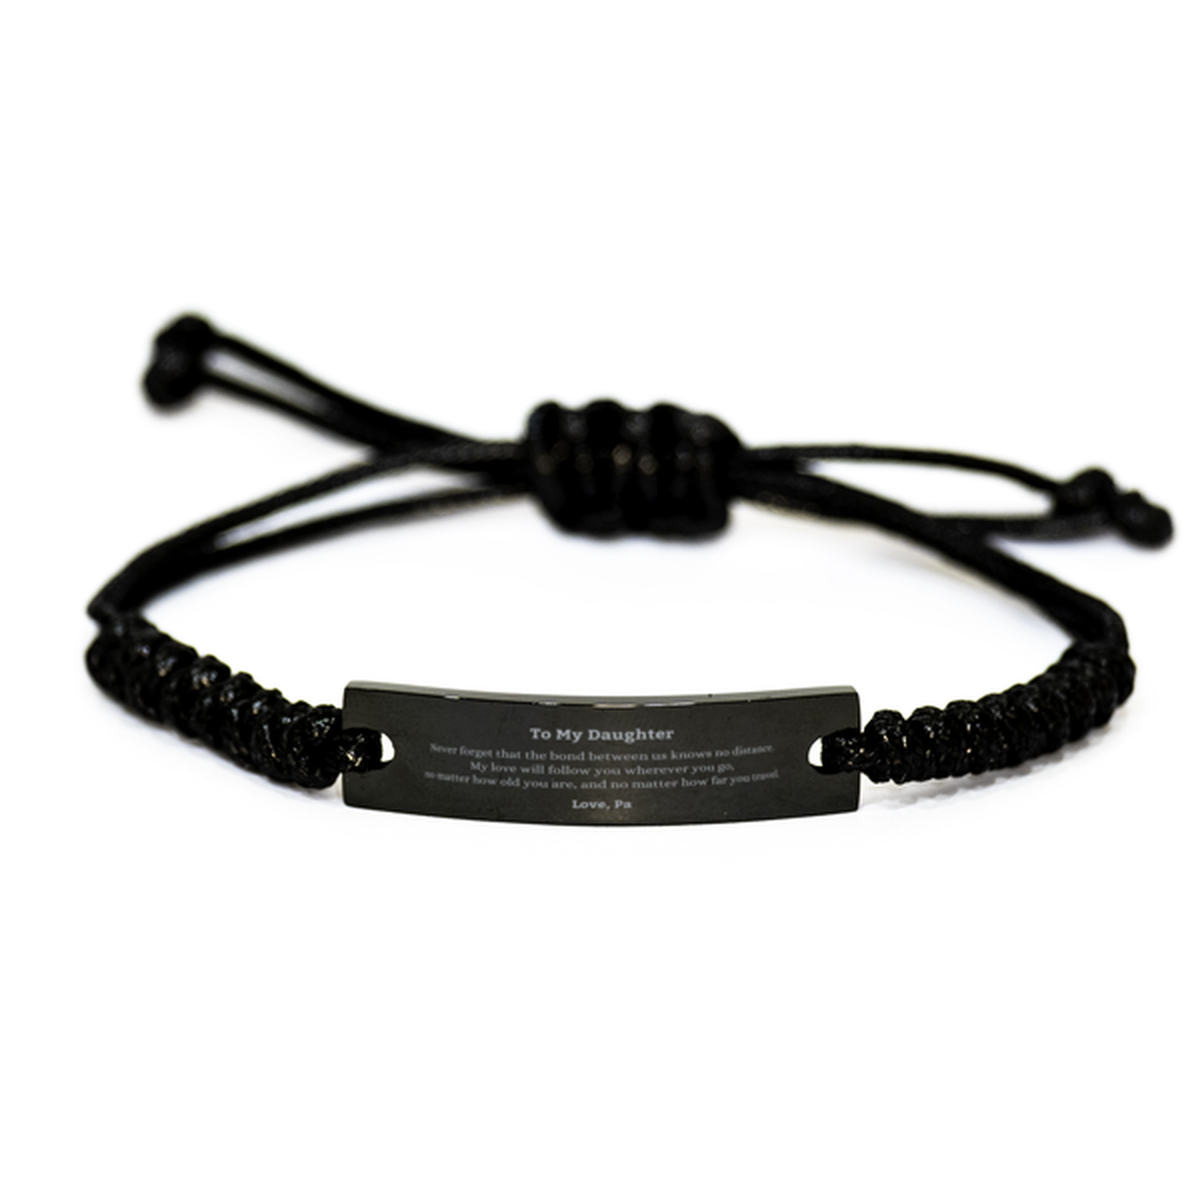 Daughter Birthday Gifts from Pa, Adjustable Black Rope Bracelet for Daughter Christmas Graduation Unique Gifts Daughter Never forget that the bond between us knows no distance. Love, Pa